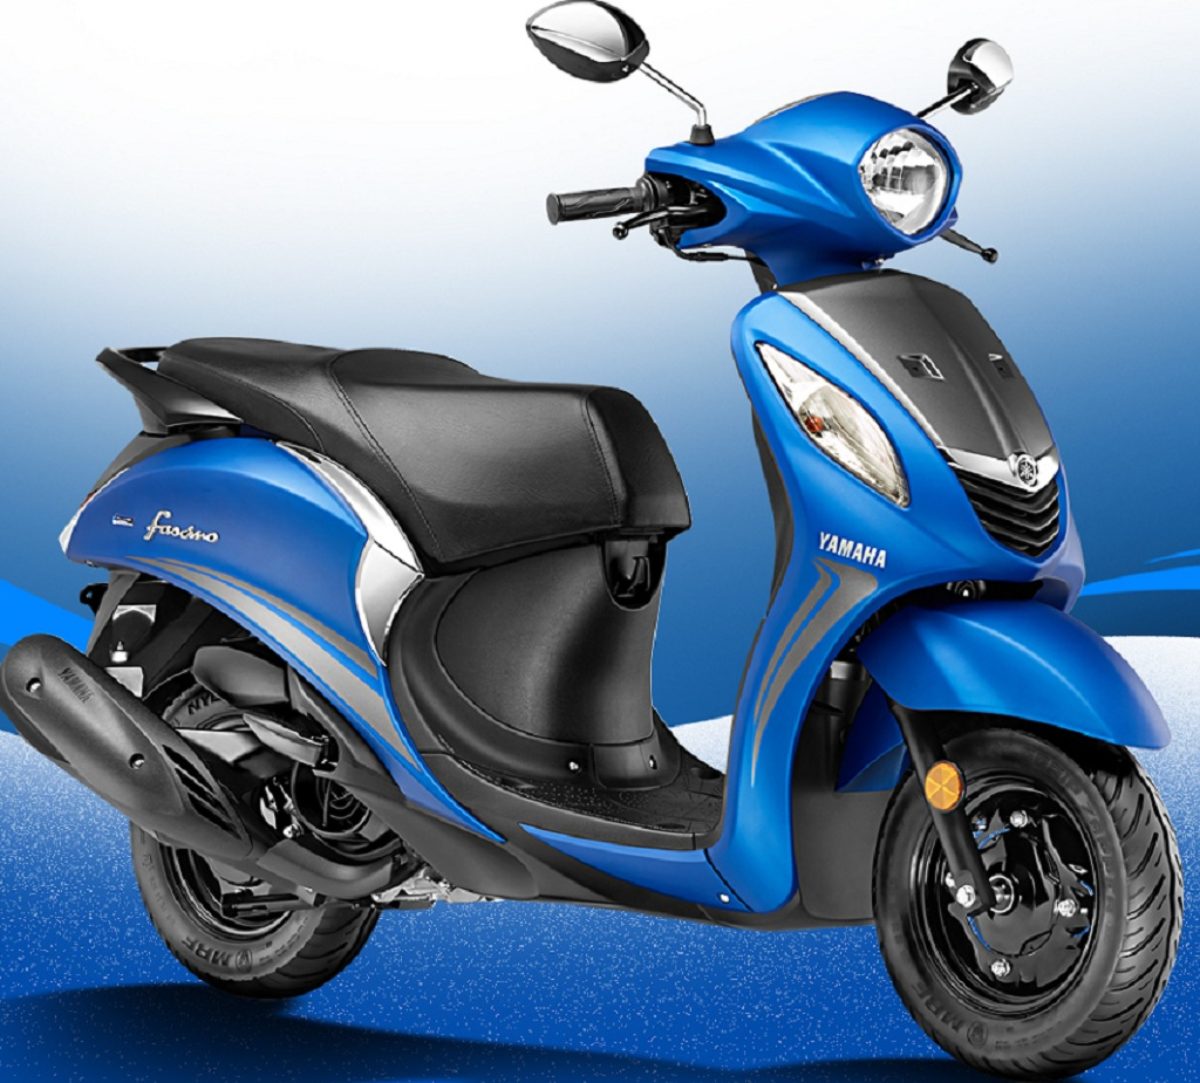 Bsiv Compliant 2017 Yamaha Fascino Launched In India At Rs 56 500